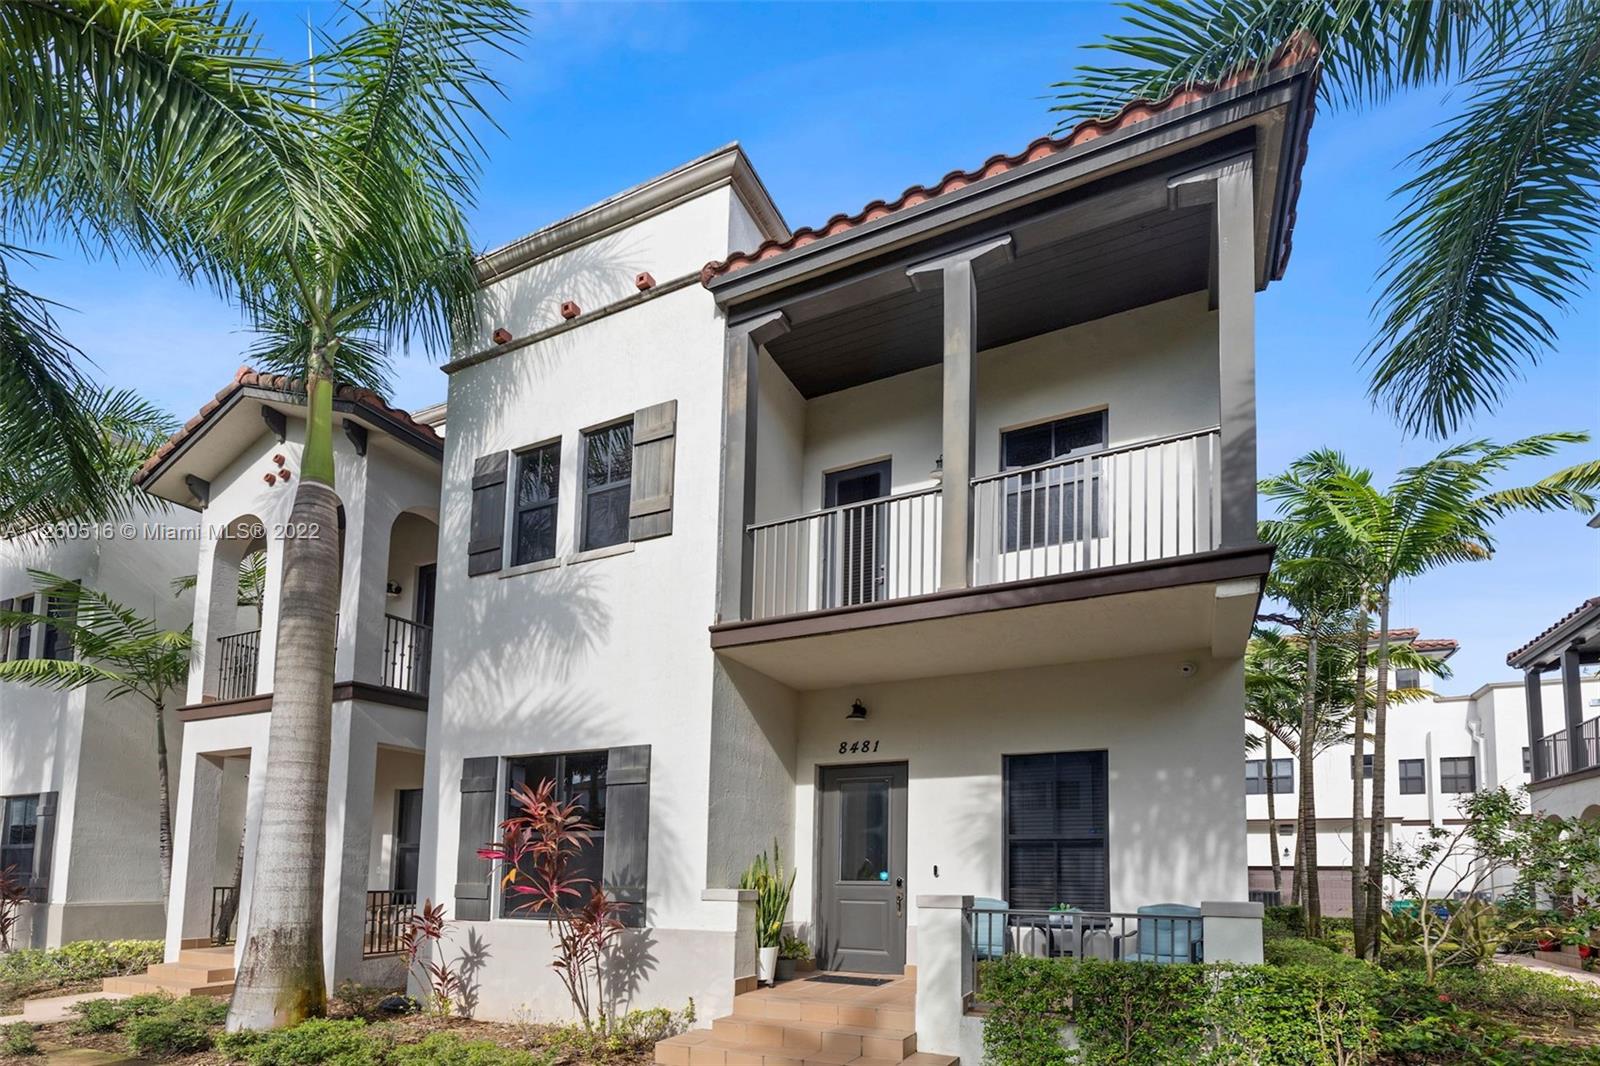 Gorgeous Townhome in Downtown Doral . This prime corner Luxury 2 story Townhome is featuring 4|3|1. Three Bedrooms on second floor, One deb room in the top third floor w/private bathroom with a large living room that you can easily convert into 5th Bedroom, or convert into Guest room and office ! First floor with amazing Ope Kitchen . Full of upgrades; European Cabinets and top of the line stainless Steel Appliances. High ceilings , enjoy the views form the oOpen Balcony , walking distance of Dowtown Doral Premium Restaurants , shops , charter schools , close to Miami International Airport and more. Wont last this great opportunity. Best Price on the Market. SELLER ONLY ACCEPTS SHOWING WITH 
PROOF OF FUNDS OR PRE-APPROVAL LENDING LETTER